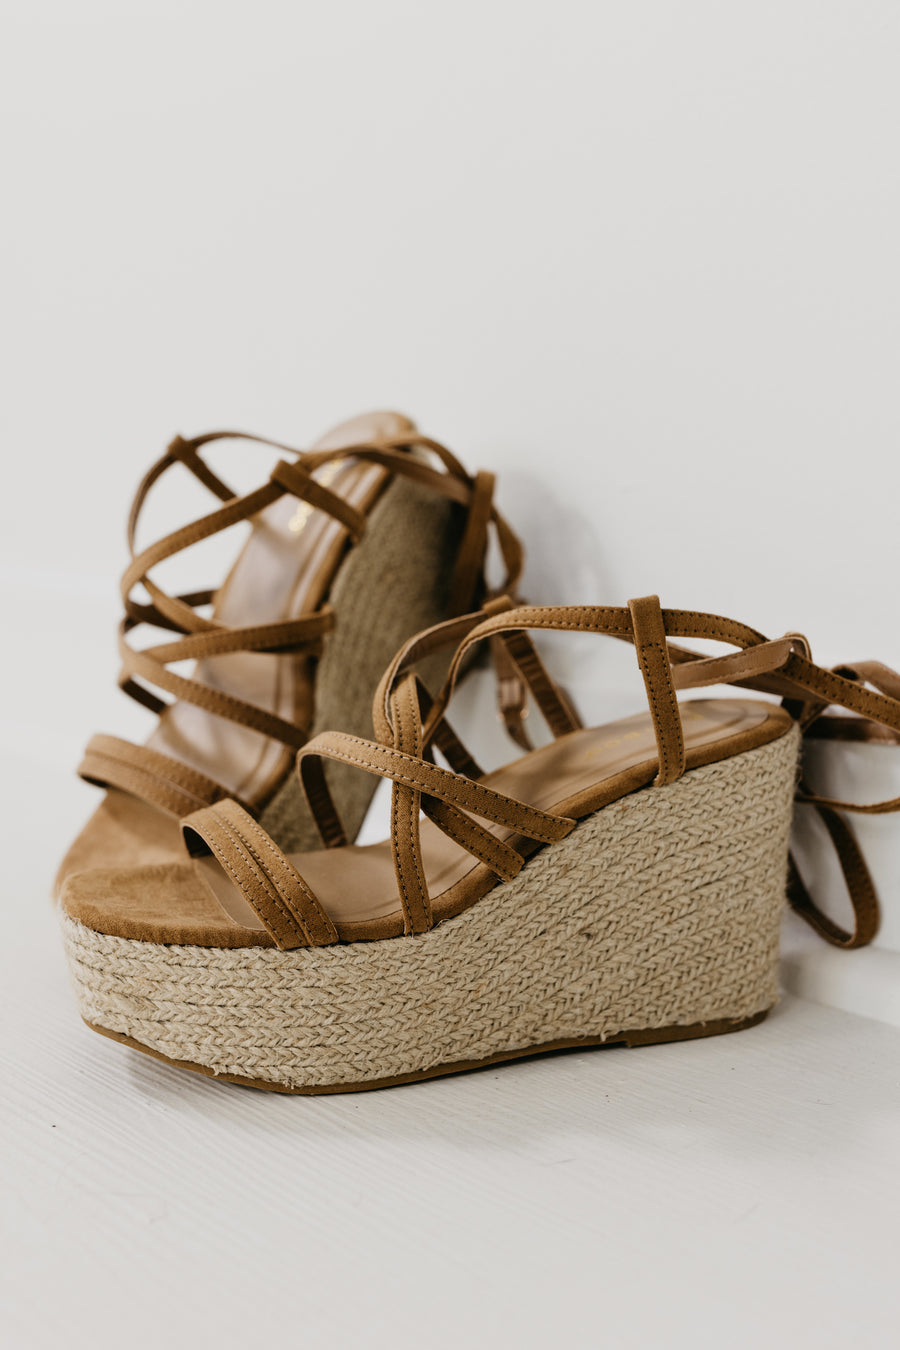 The Certify Strappy Ankle Espadrille